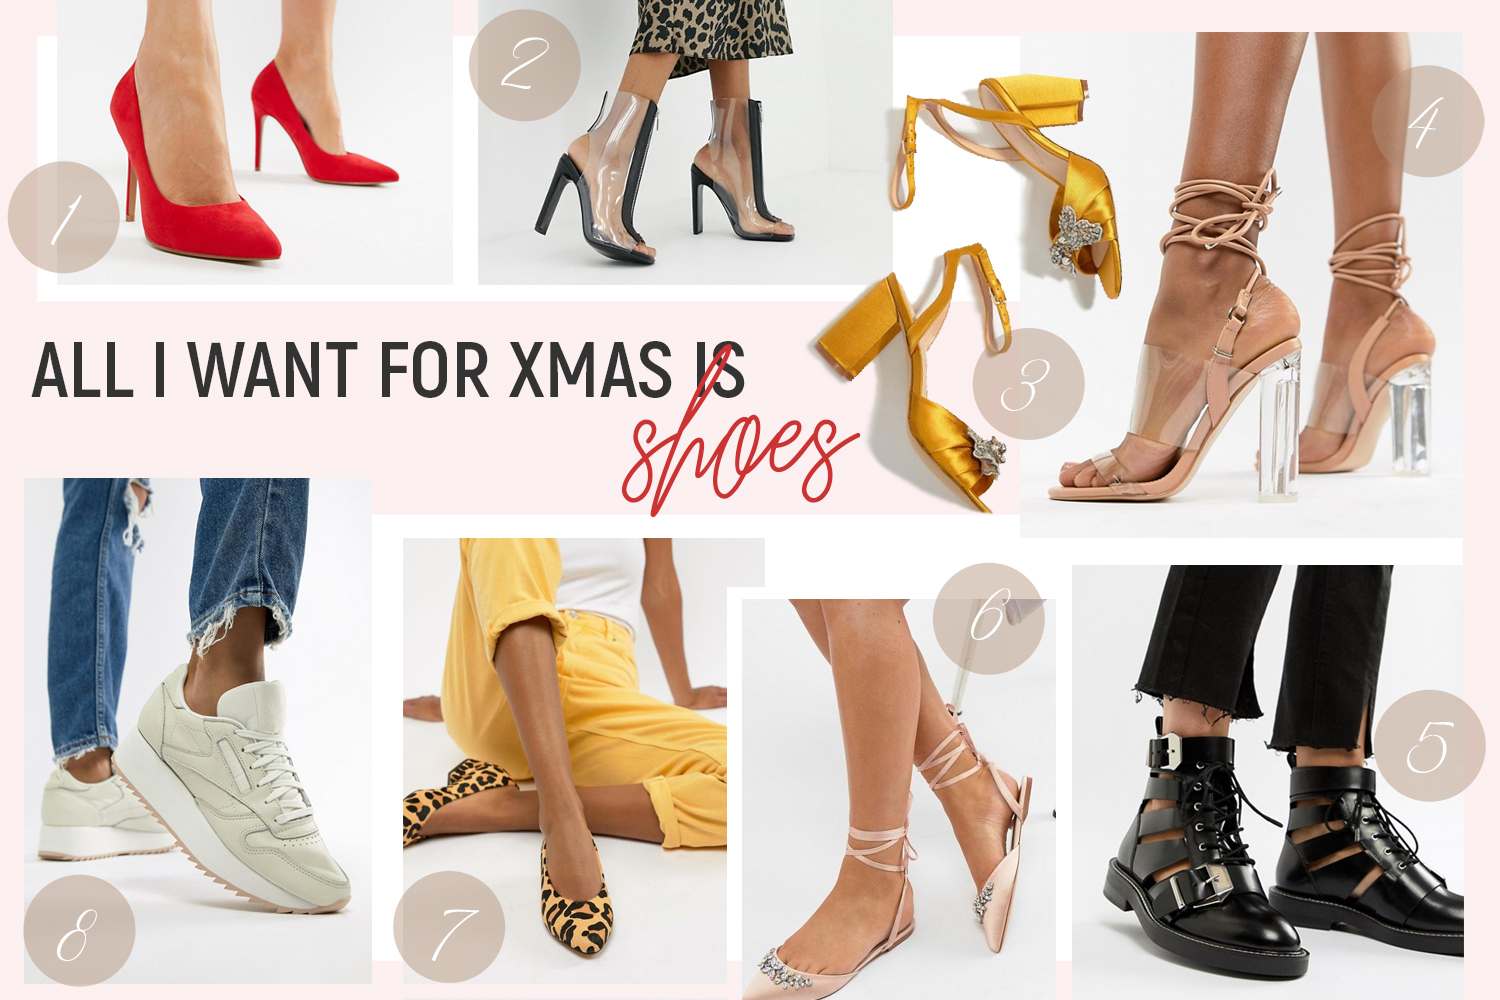 All I want for Xmas is Shoes by Tamara Bellis